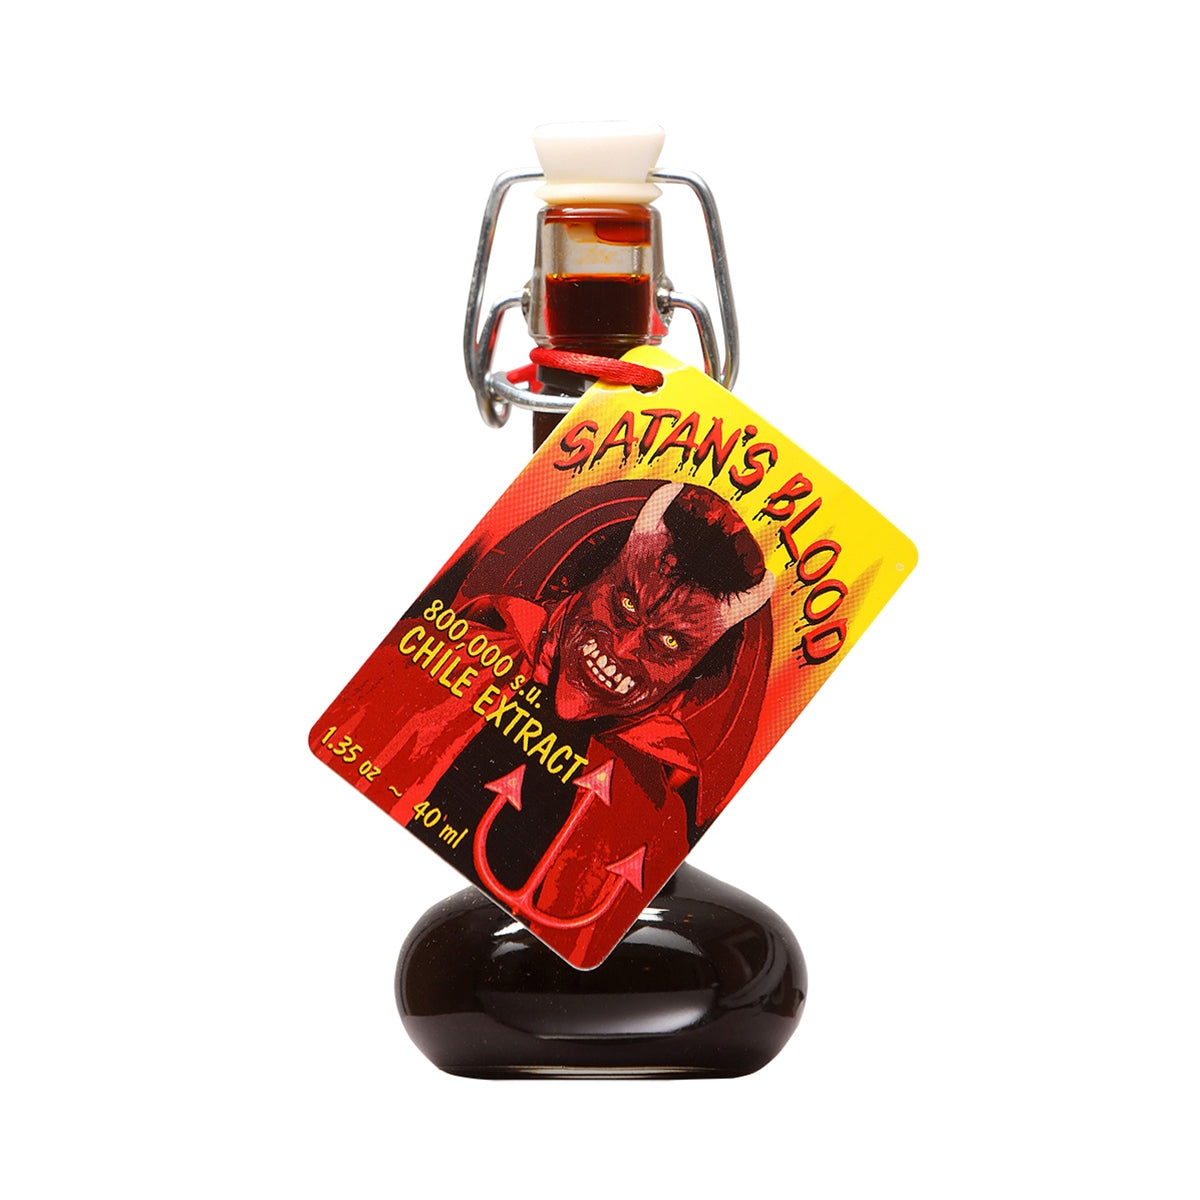 Hot Sauce Satans Blood 1.35 oz Flask 800,000 Scoville Units Heat 10+++Extract